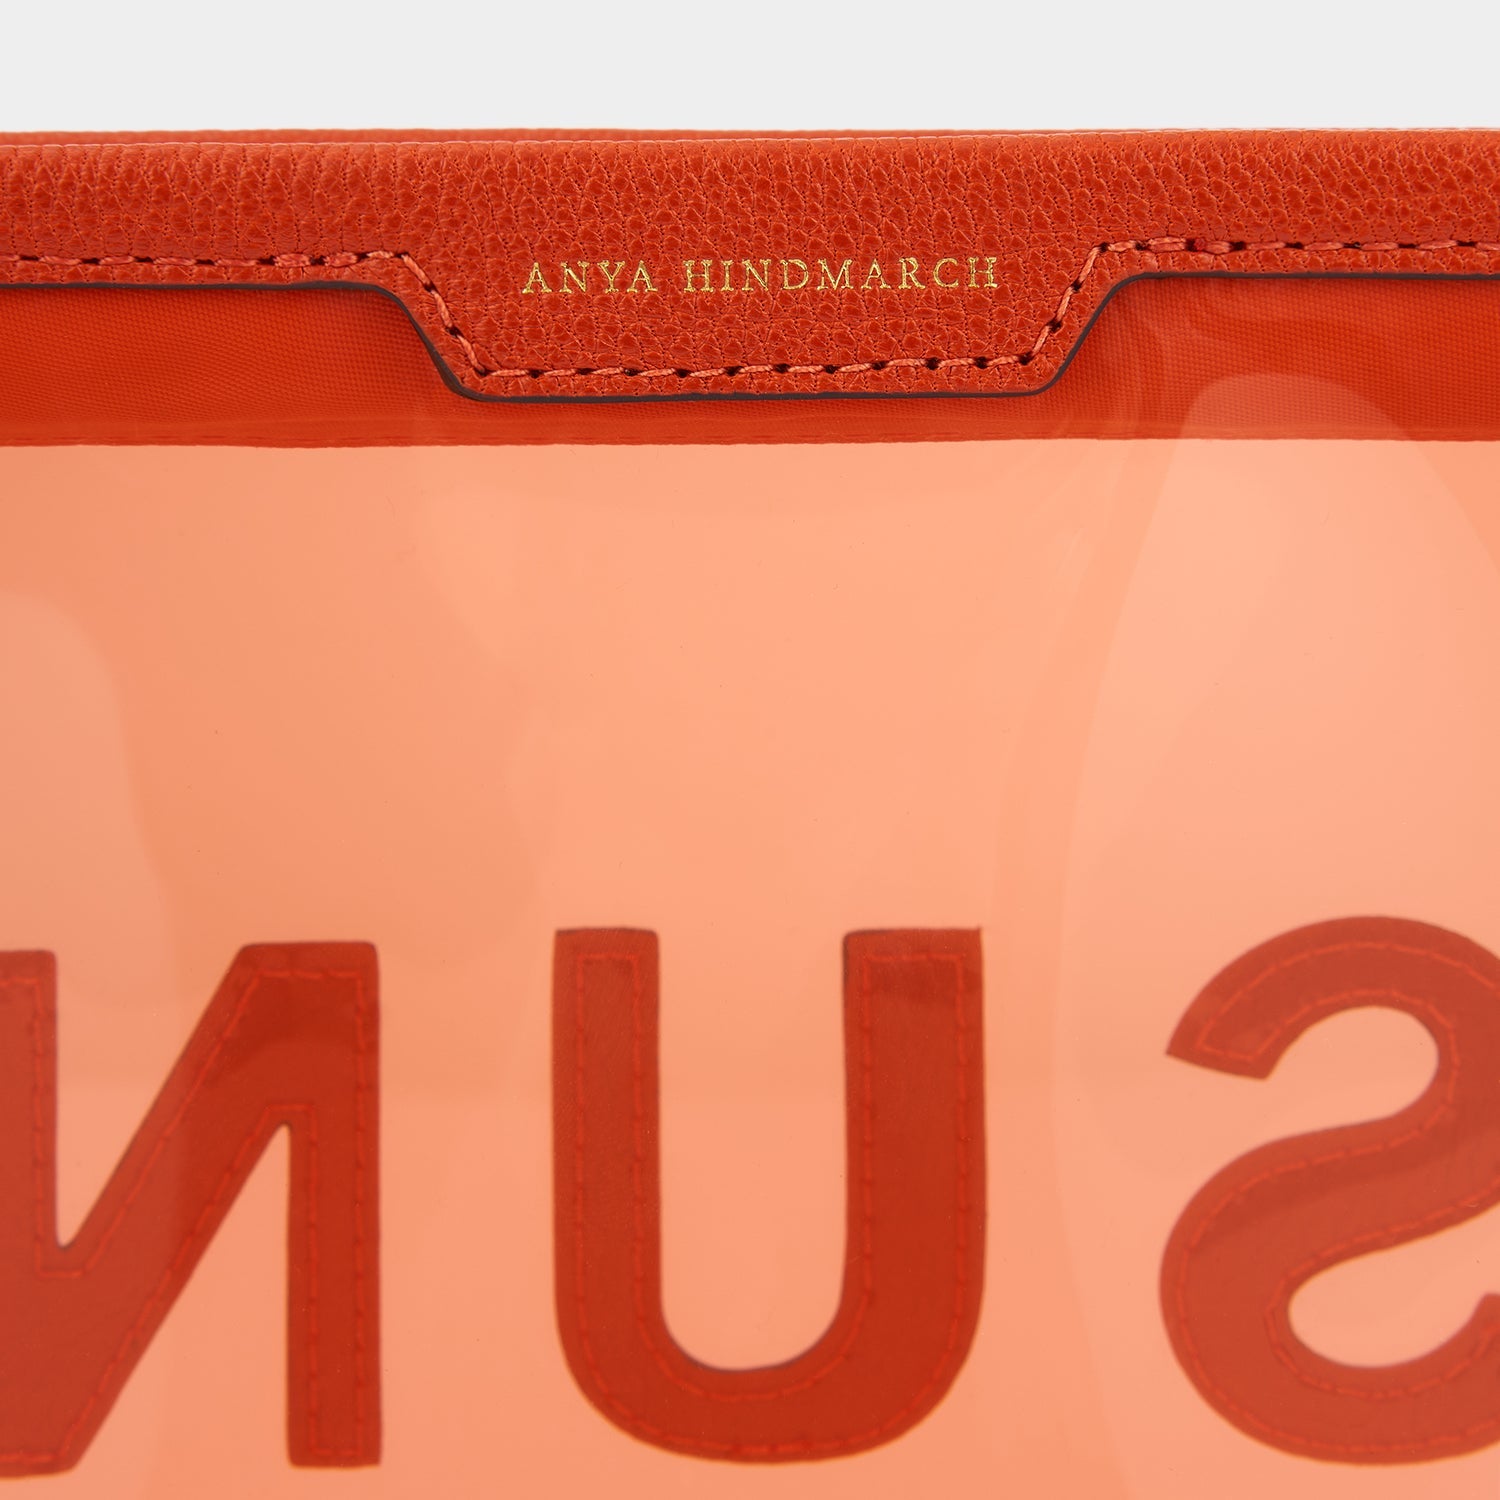 Sun Pouch -

                  
                    Capra in Clementine -
                  

                  Anya Hindmarch US
